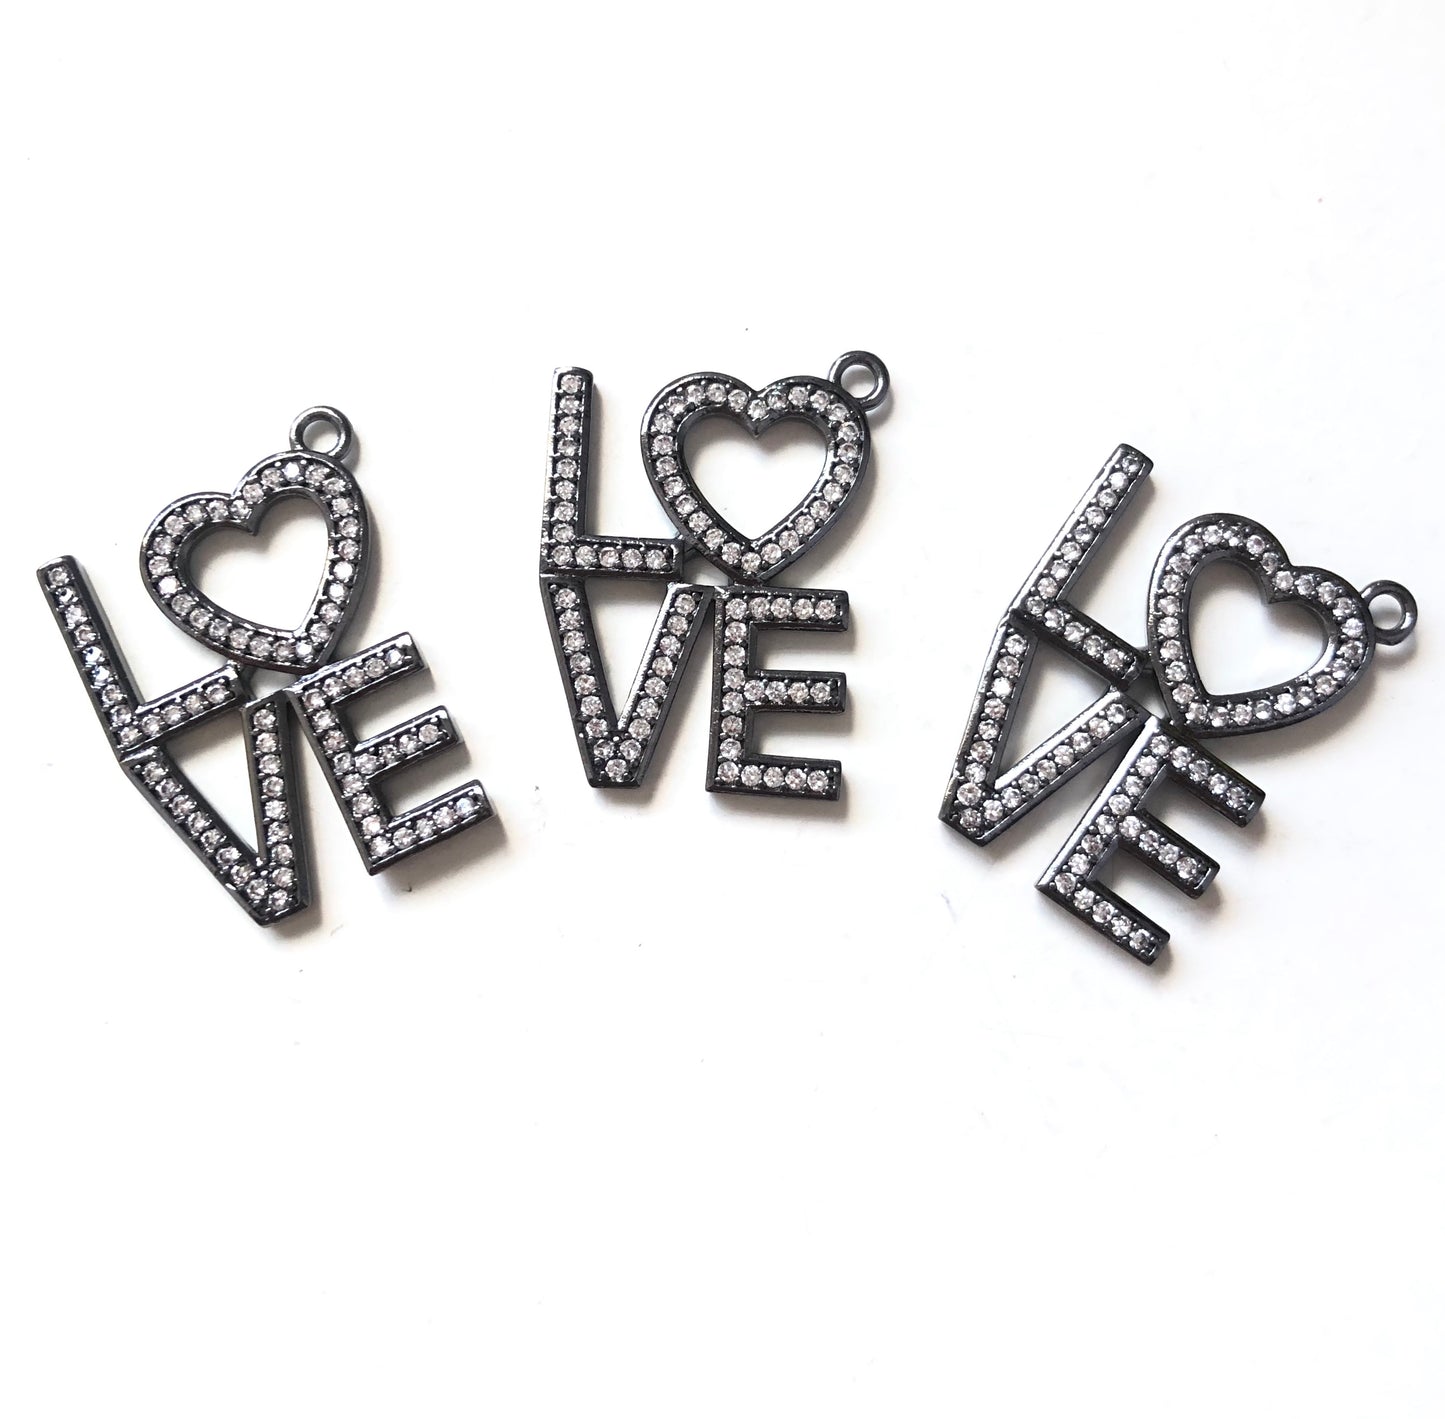 10pcs/lot 25*20mm CZ Paved LOVE Charms Black CZ Paved Charms Love Letters Words & Quotes Charms Beads Beyond